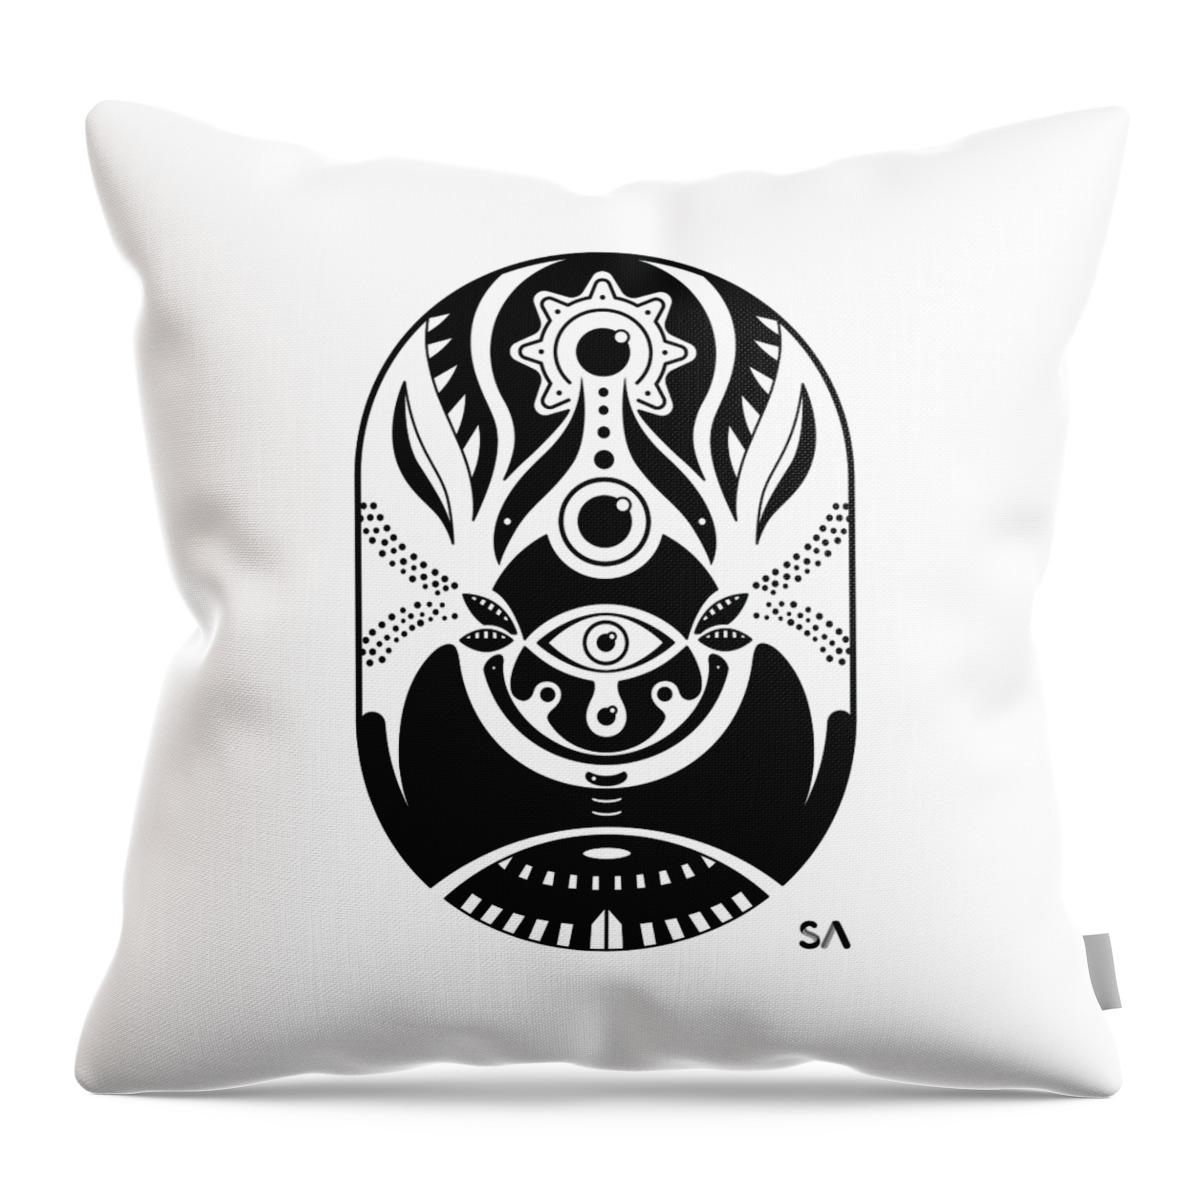 Black And White Throw Pillow featuring the digital art Eyes by Silvio Ary Cavalcante